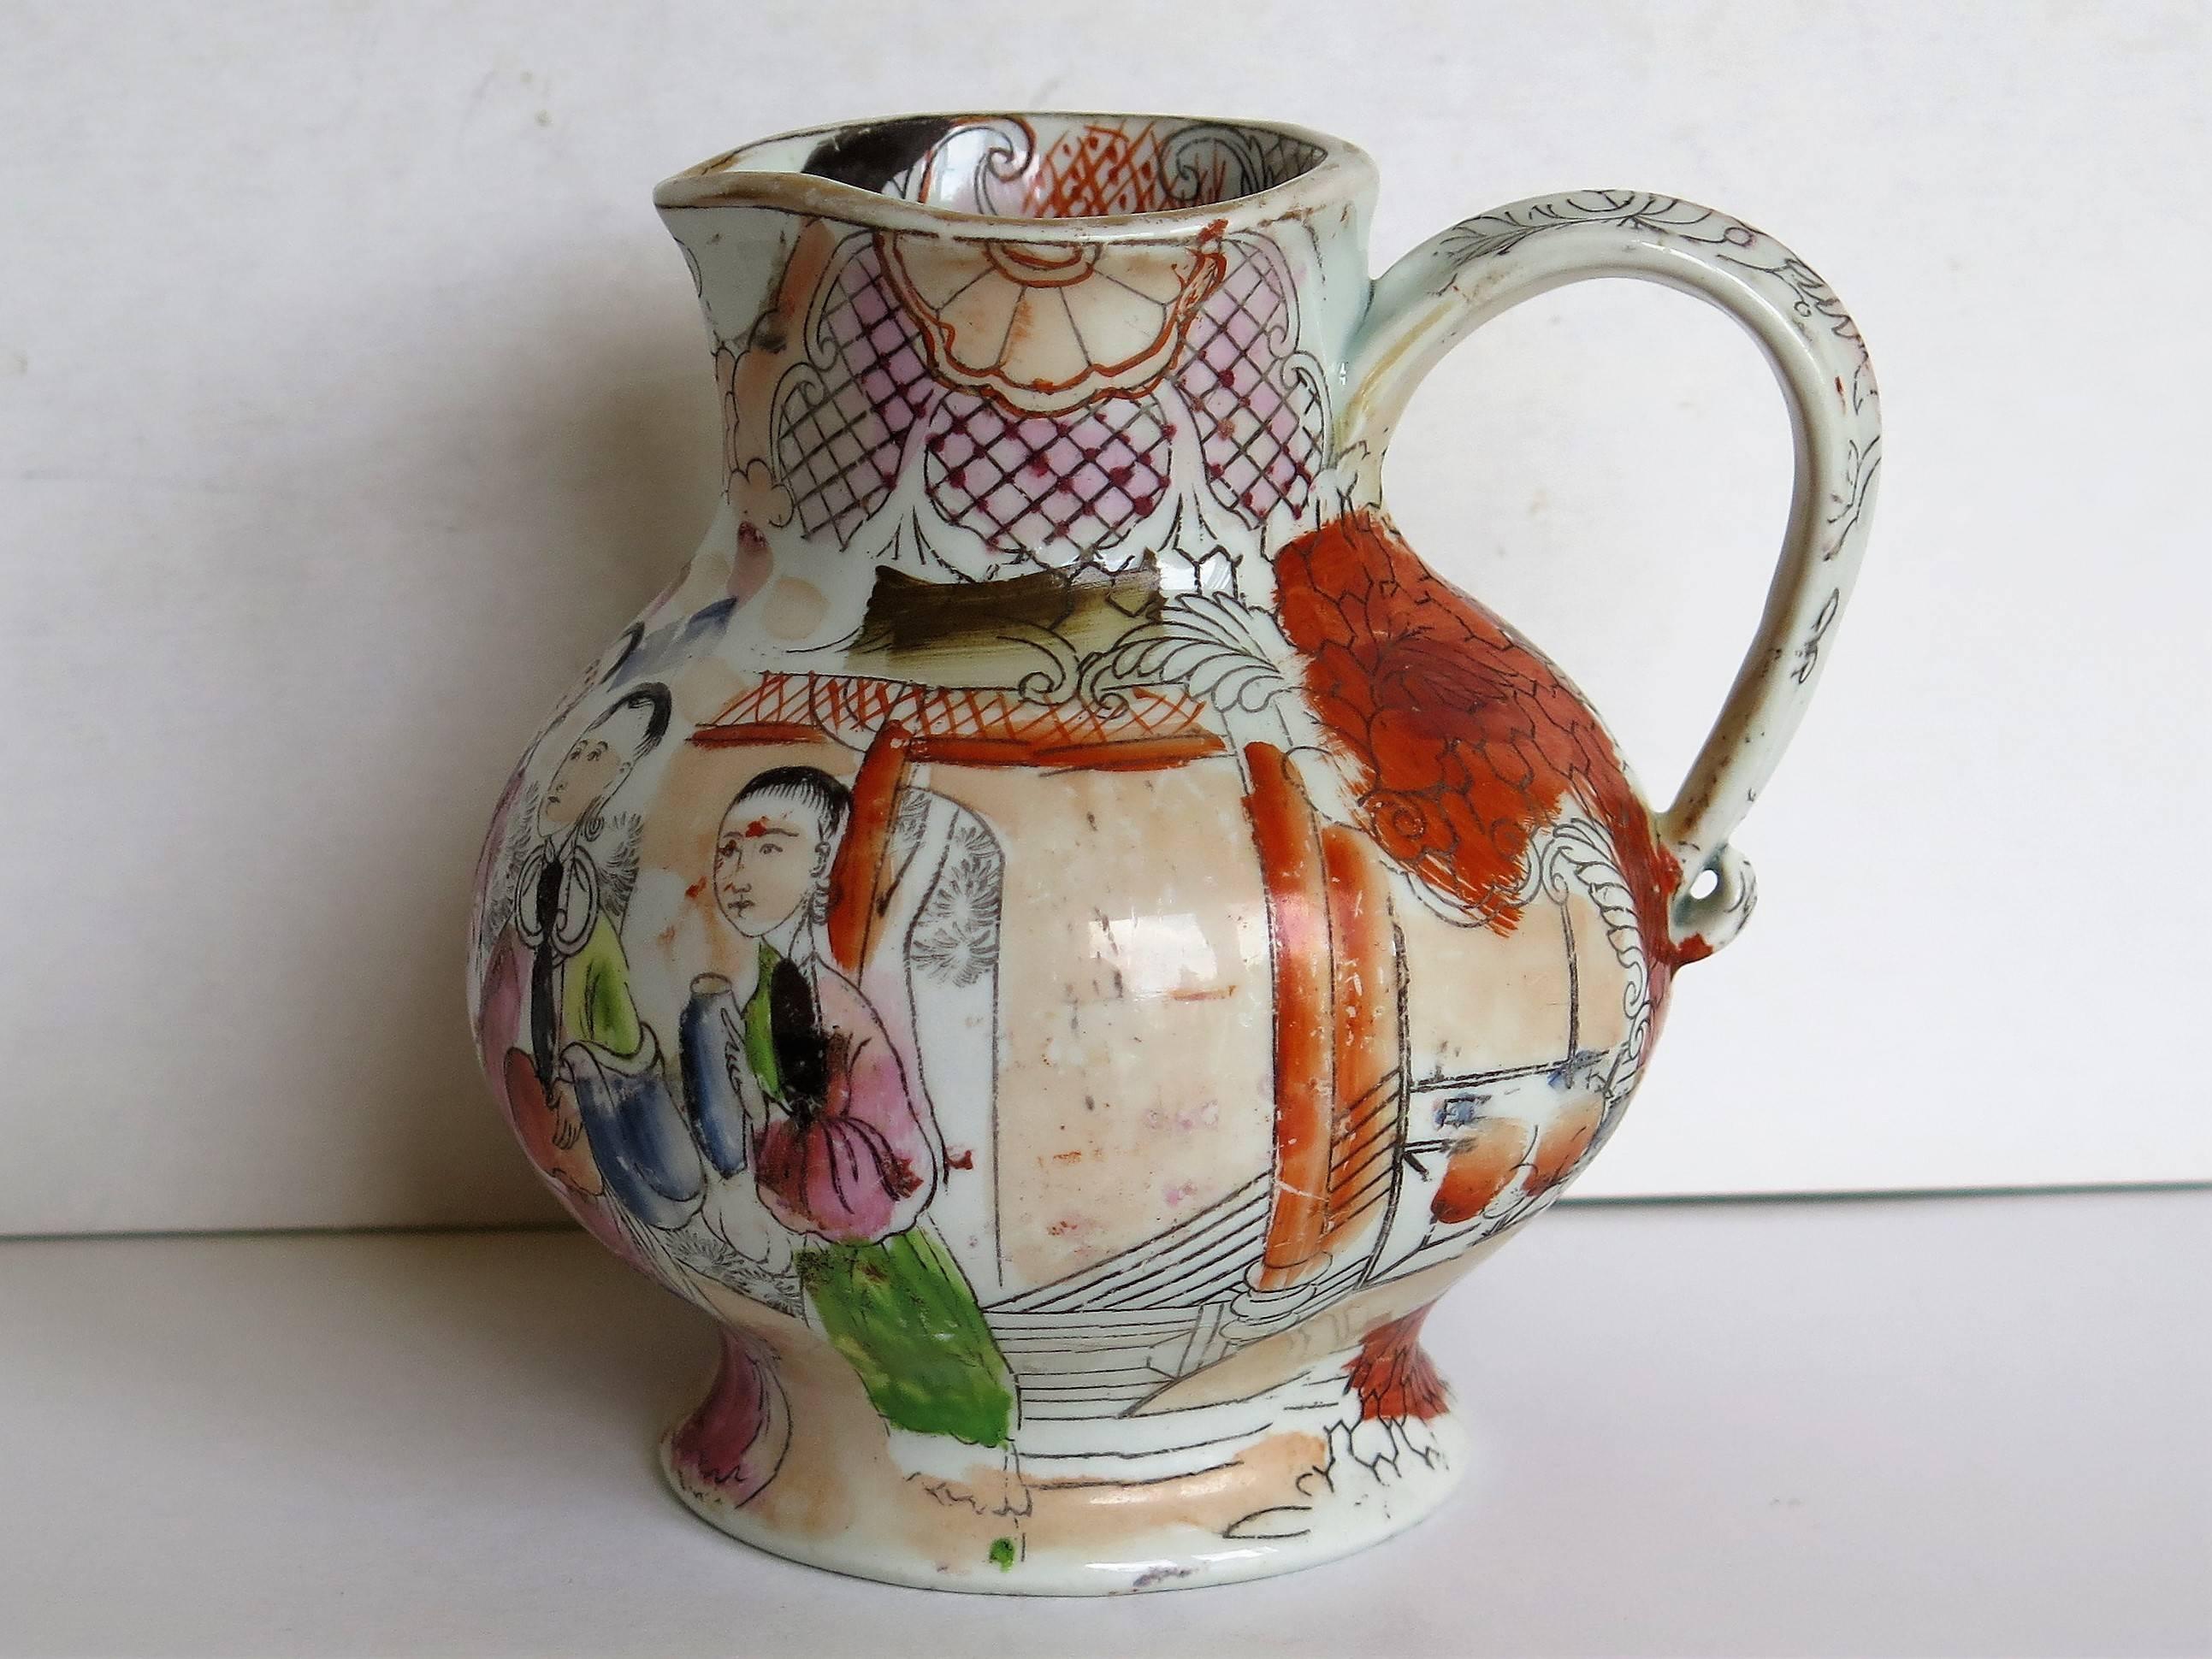 This is an early Mason's Ironstone Jug in a rare shape and pattern.

The jug has a globular body with a loop handle - normally Mason's jugs are in the octagonal hydra shape or sometimes the Fenton shape. This globular shape is much rarer.

The